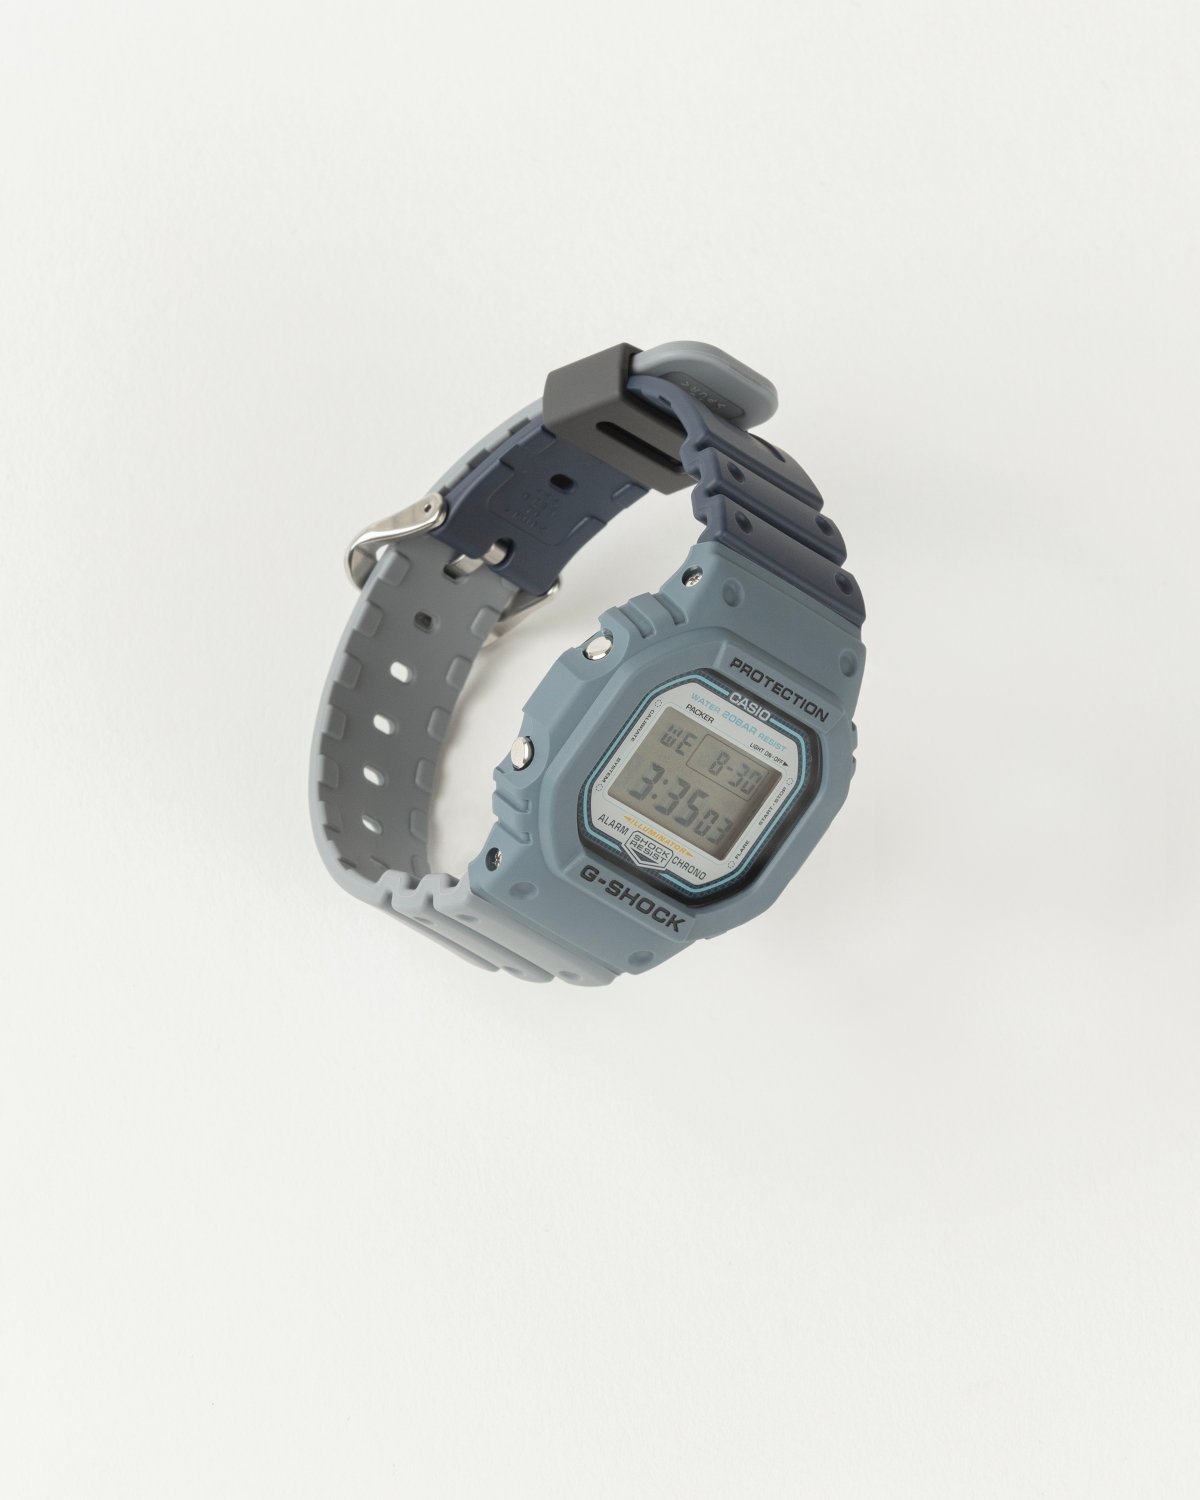 New Jersey sneaker boutique Packer to release G-Shock DW5600